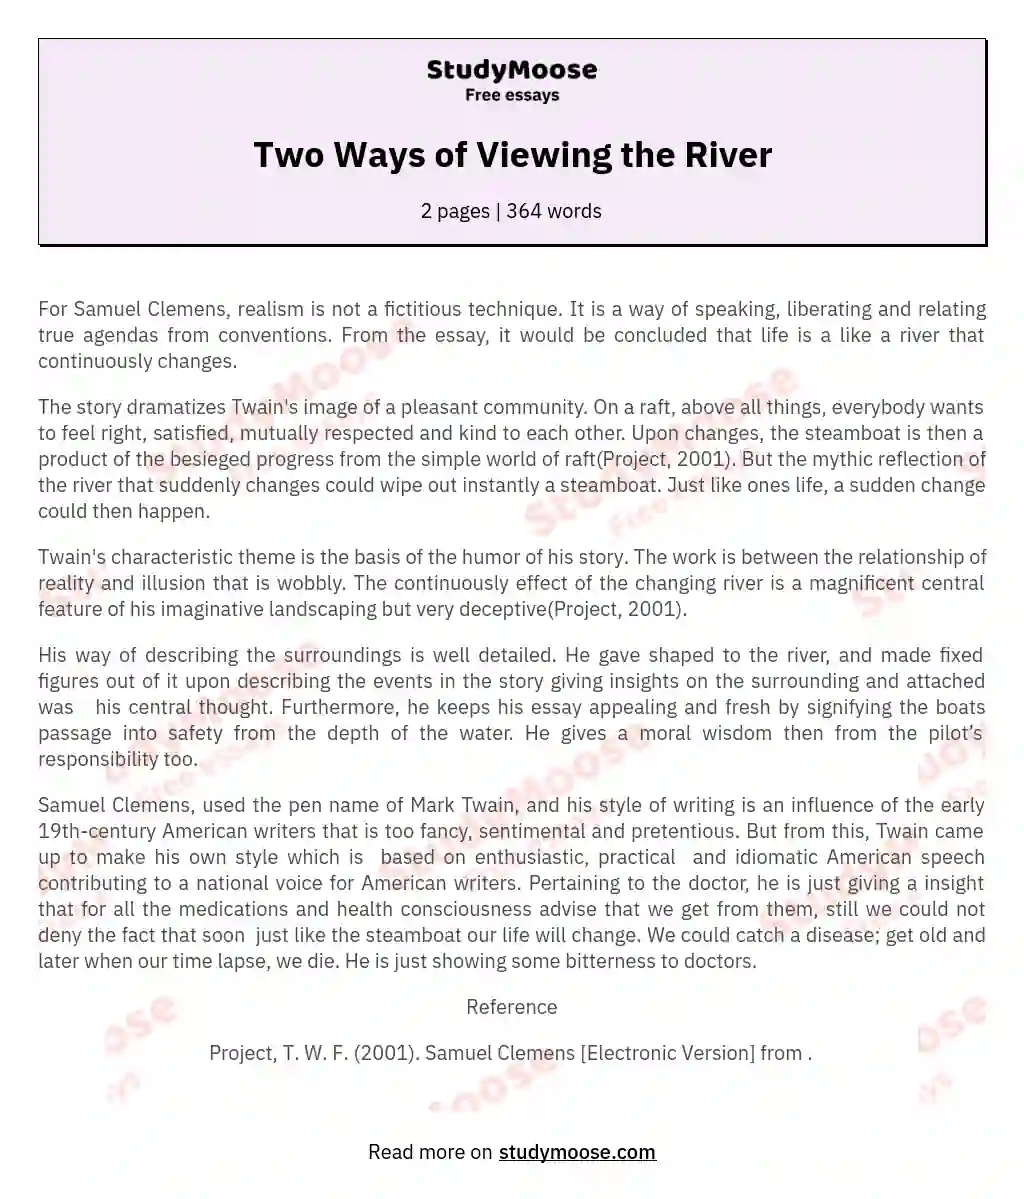 Two Ways of Viewing the River essay